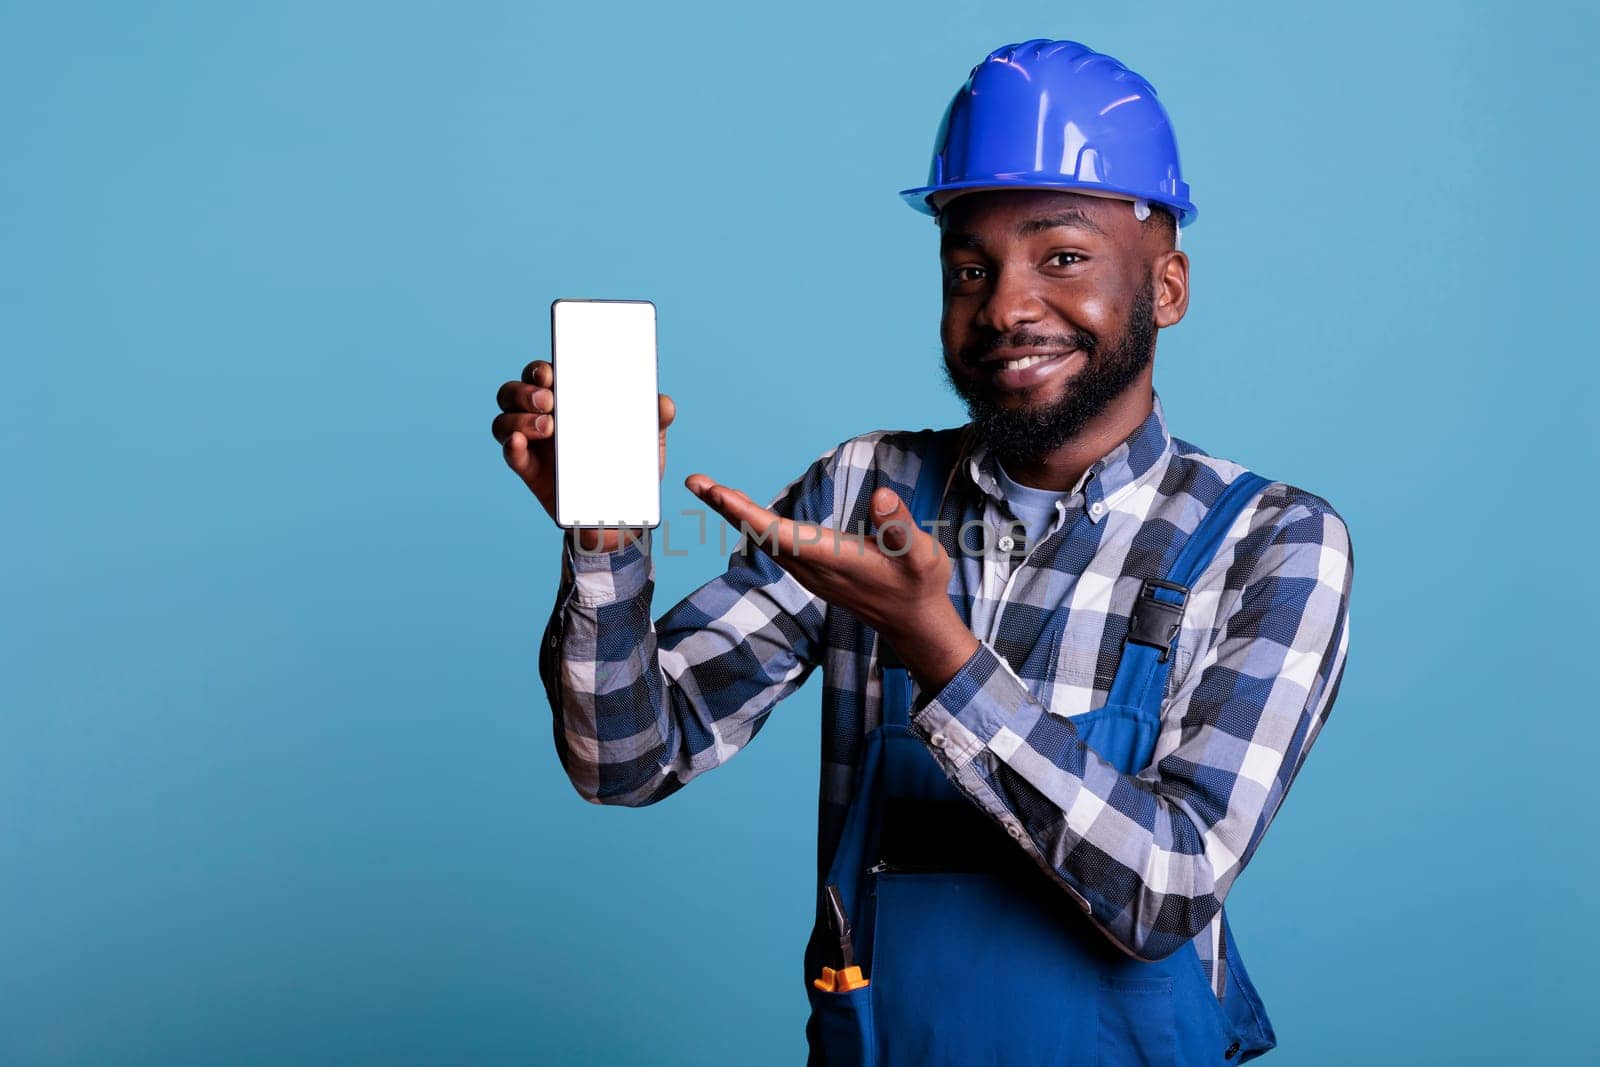 Optimistic african american contractor showing empty mobile phone screen for advertising in studio shot. Construction worker wearing uniform and hard hat against blue background, smiling at camera.